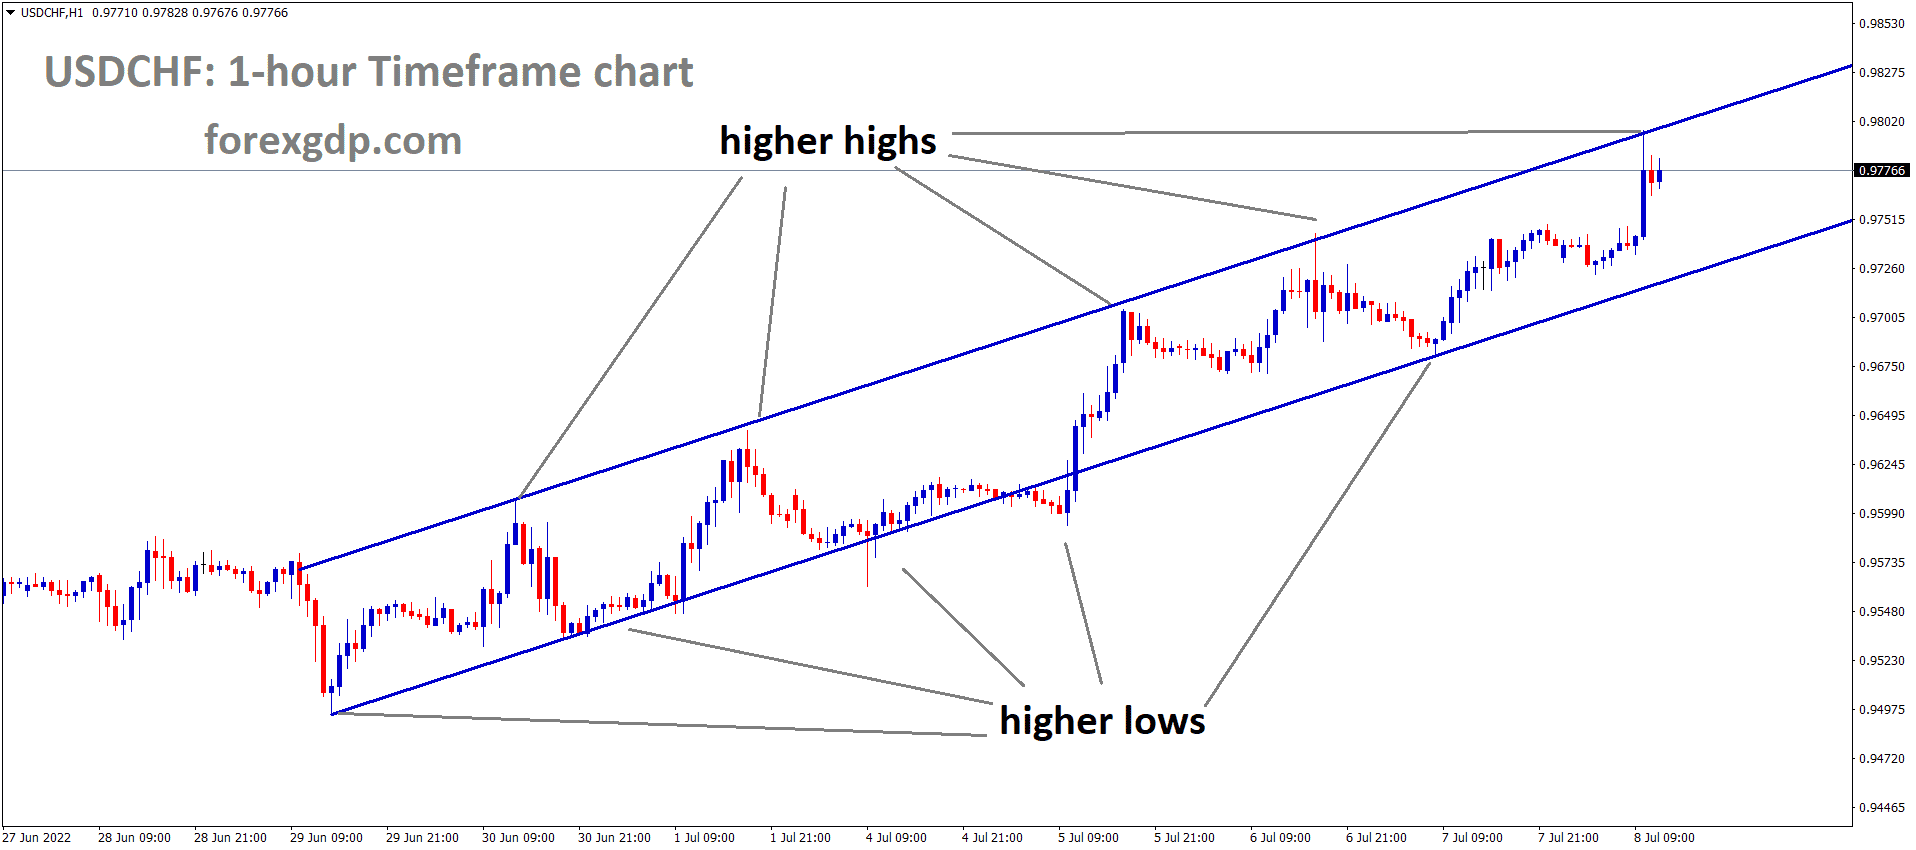 USDCHF is moving in an Ascending channel and the market has reached the Higher high area of the channel 1